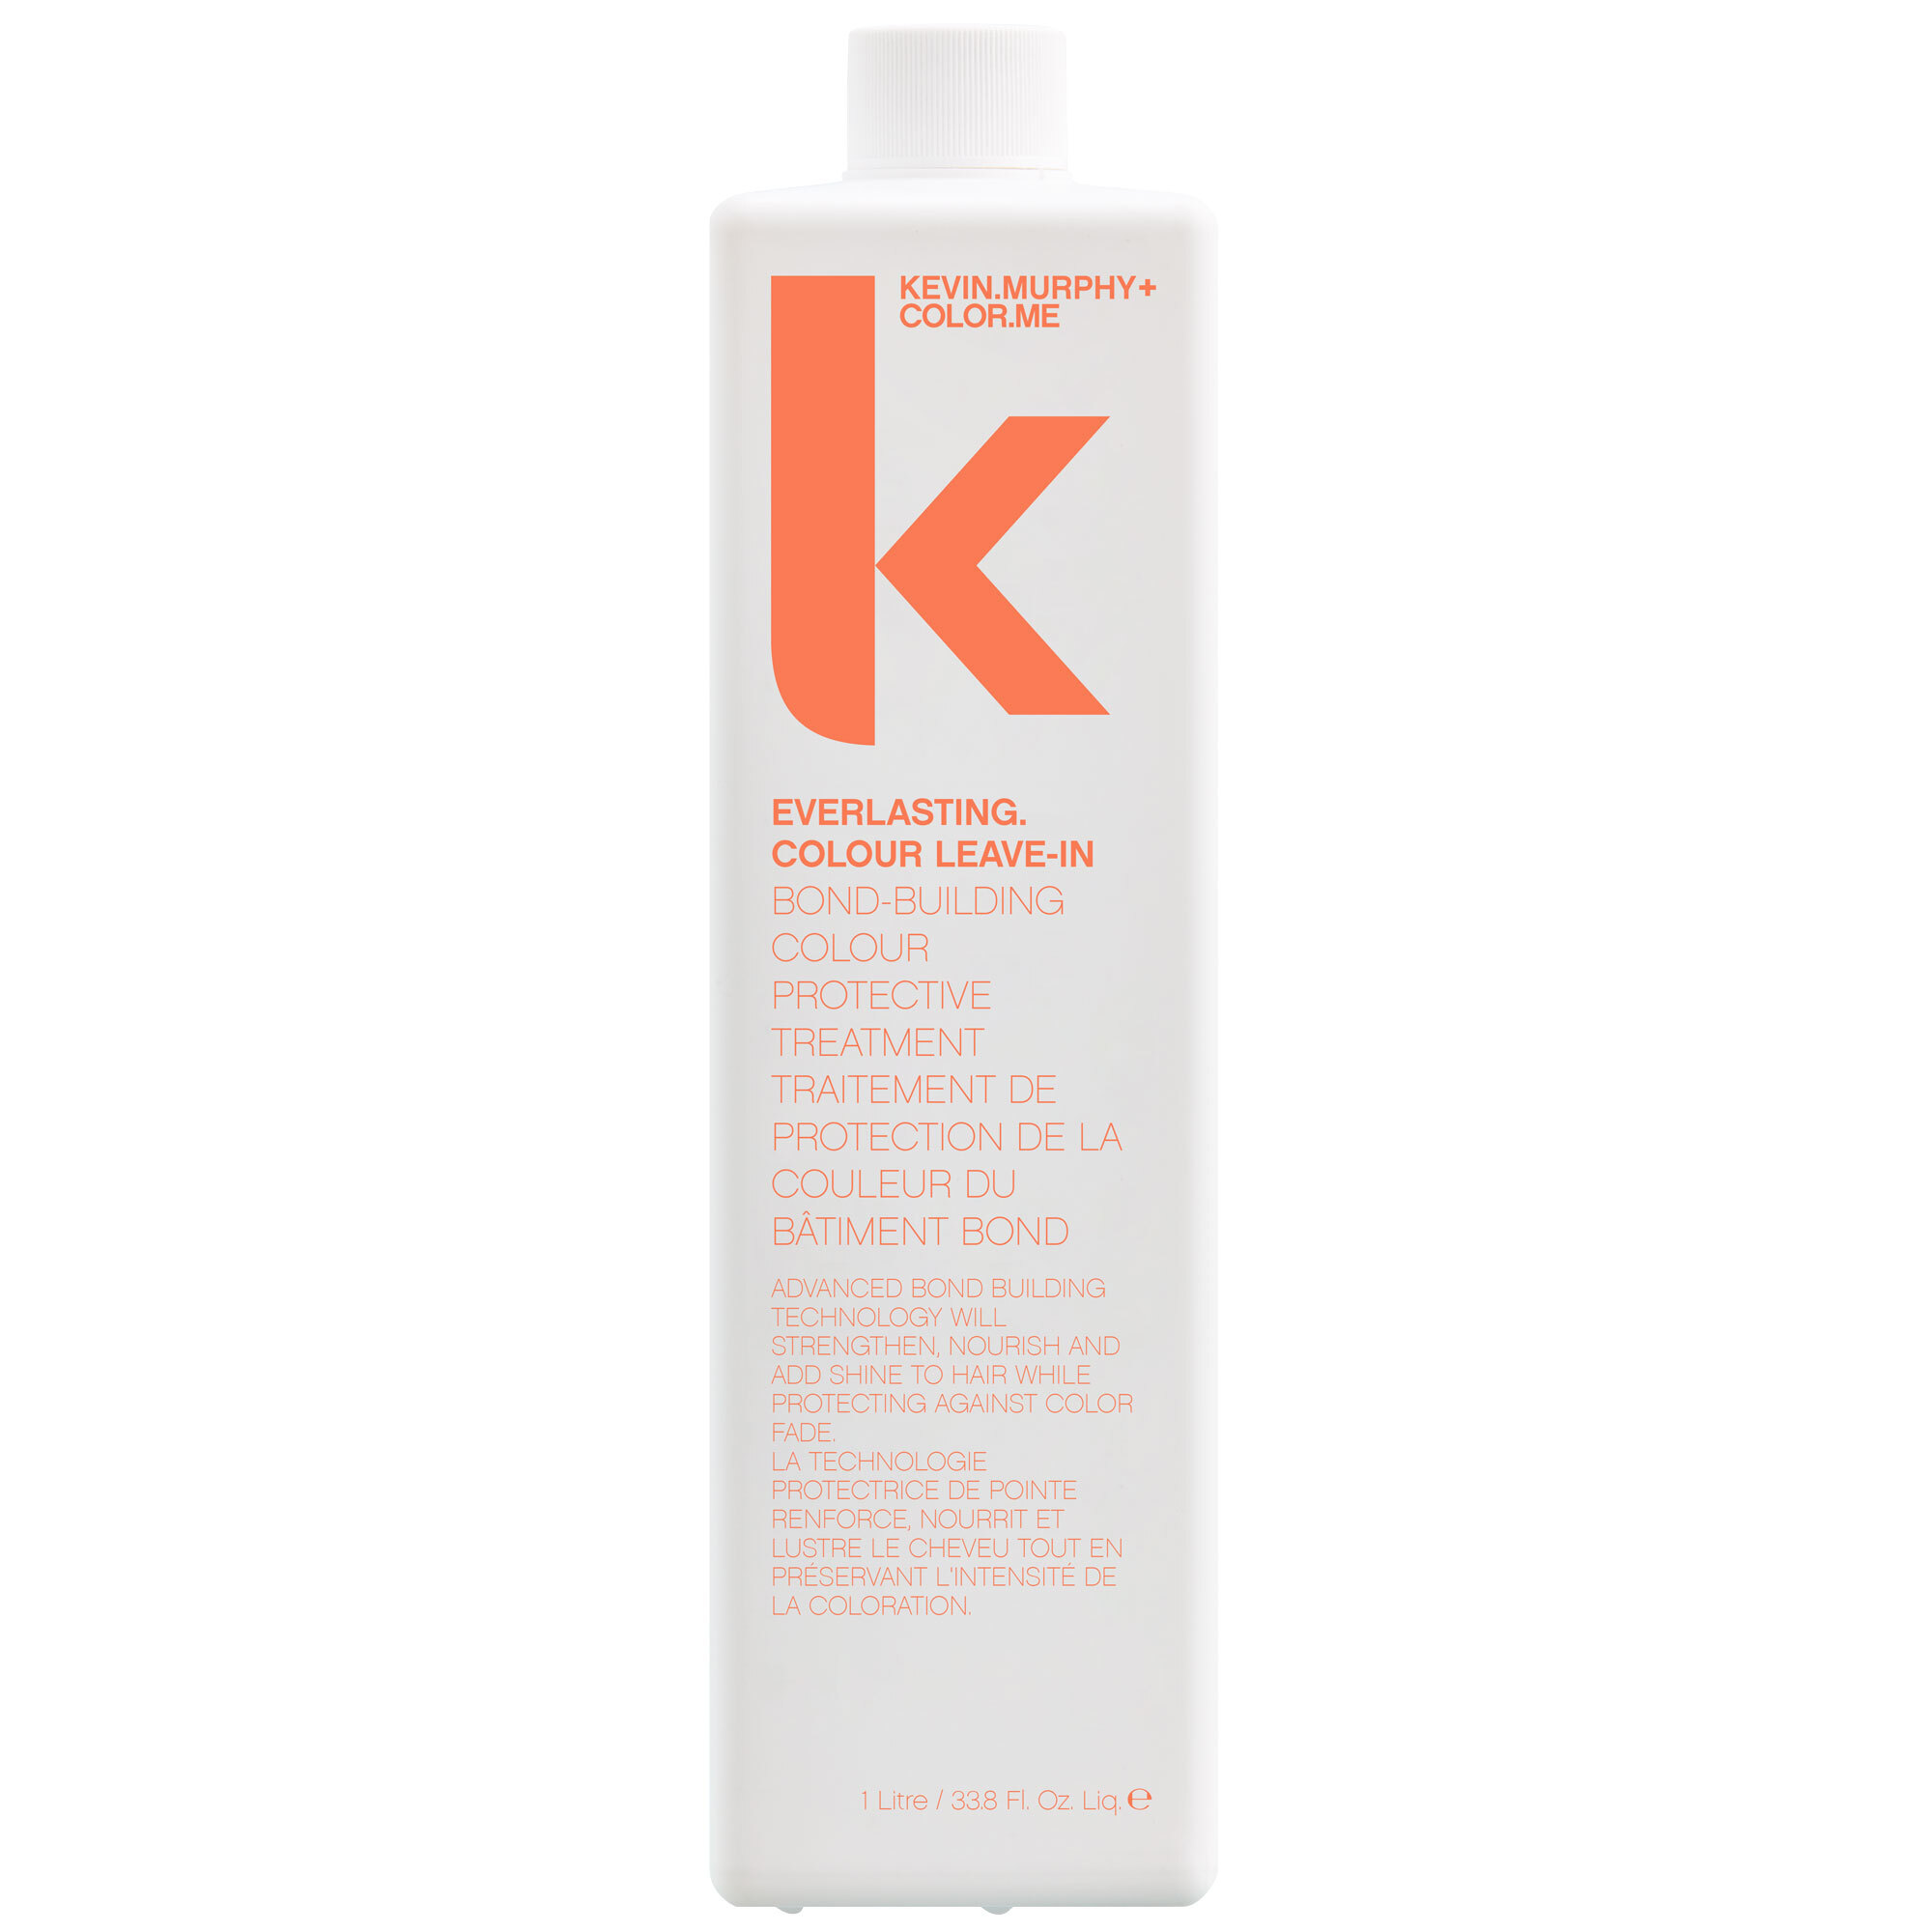 KEVIN.MURPHY EVERLASTING.COLOUR Leave-In